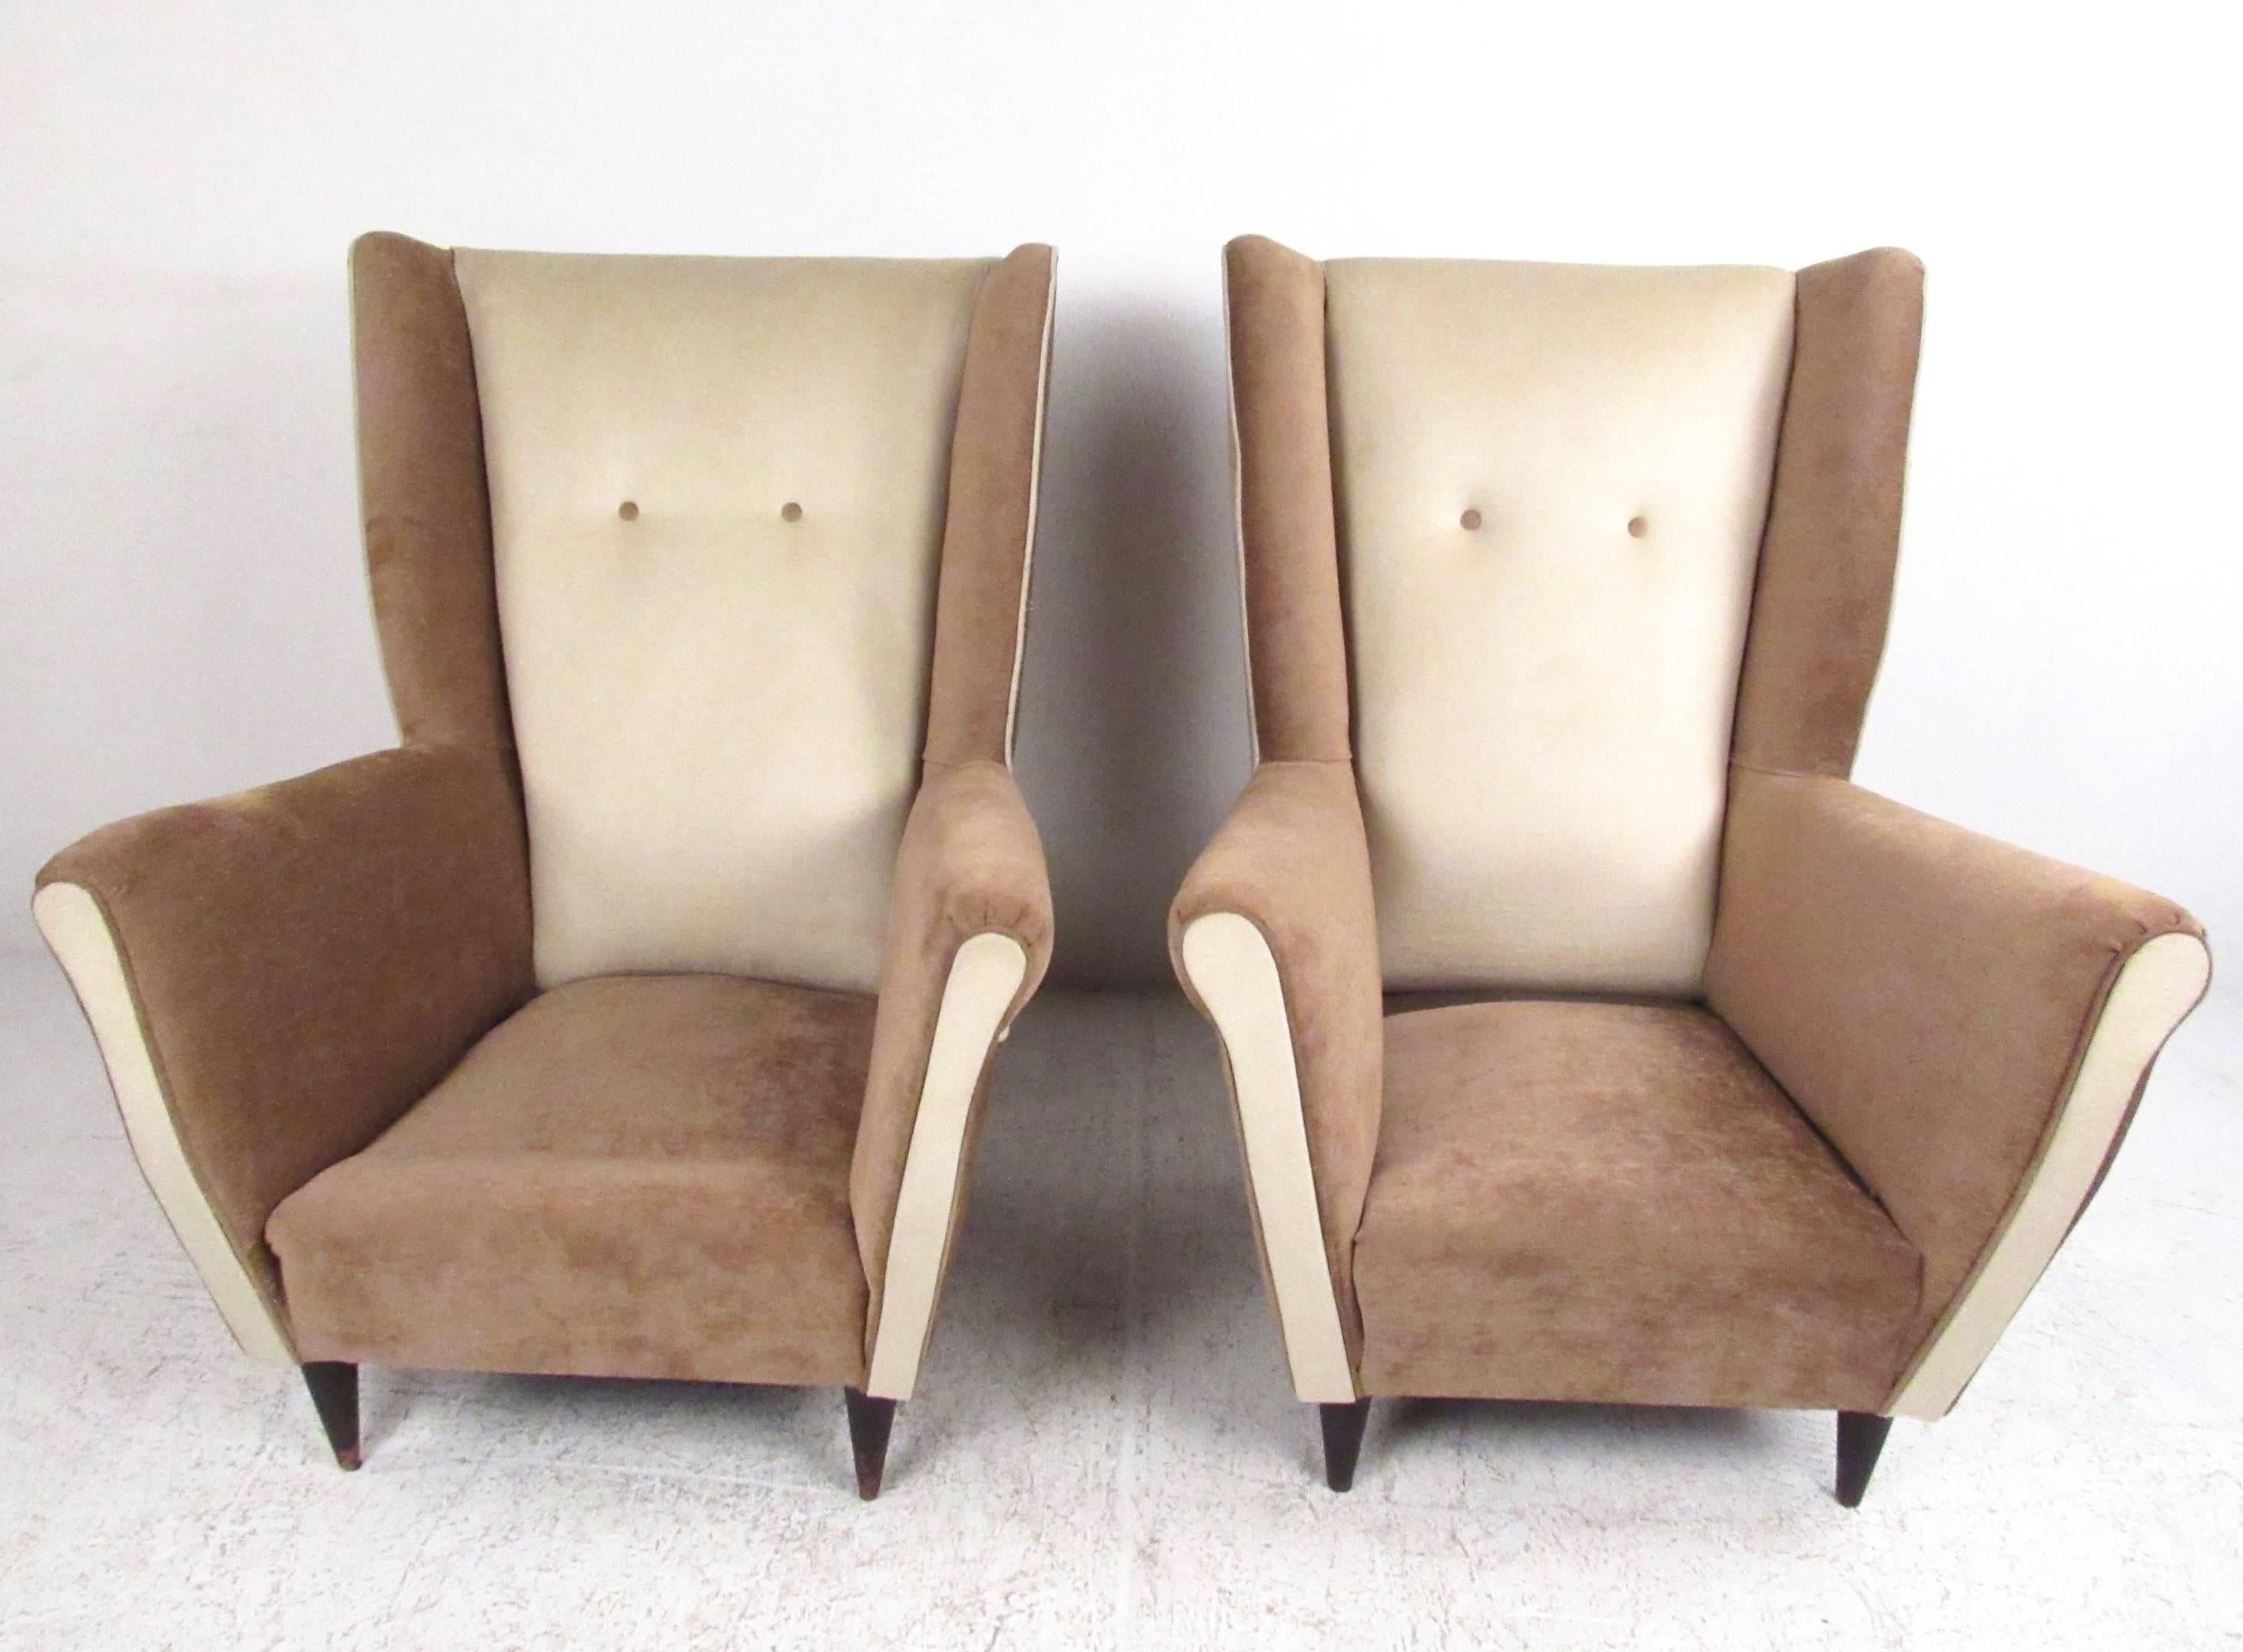 Pair of Modern Italian High Back Lounge Chairs In Good Condition For Sale In Brooklyn, NY